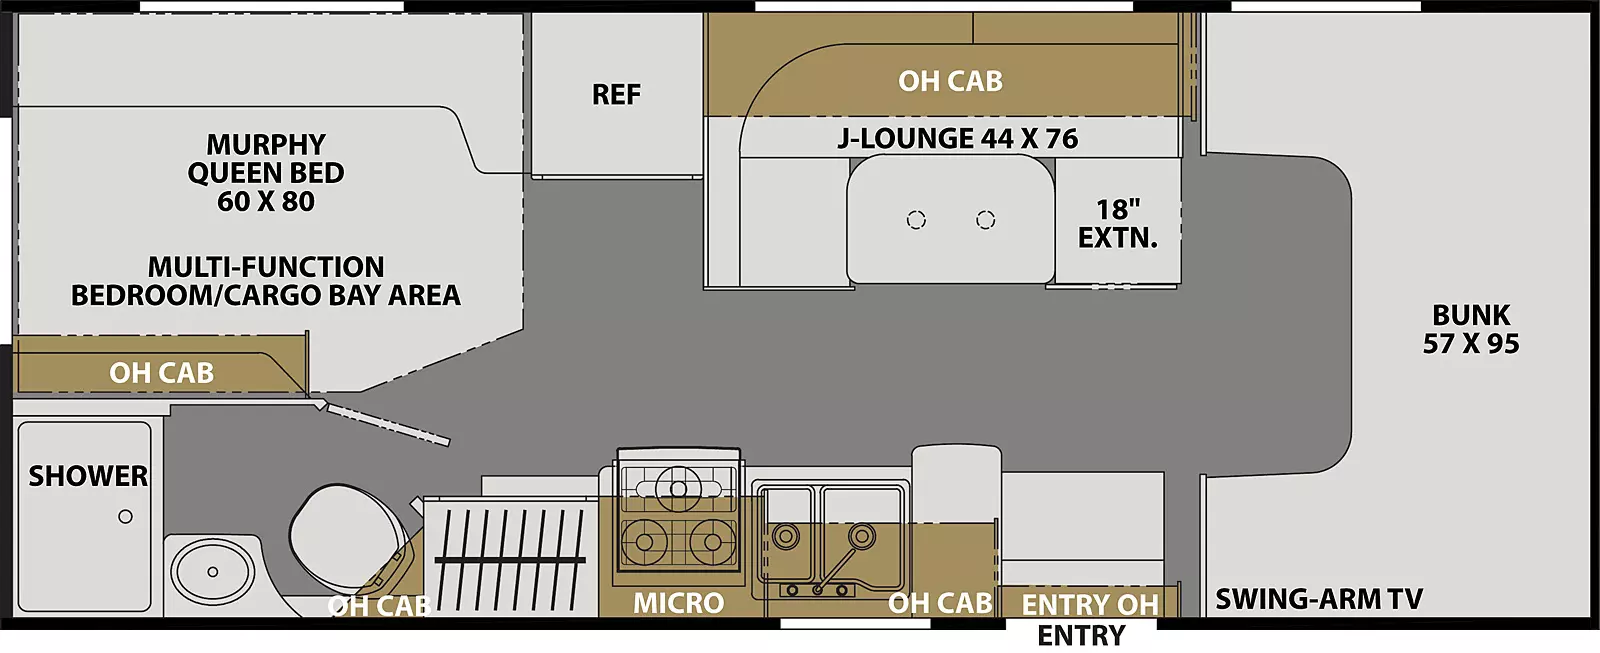 The Freelander 22XG FORD 450  has 0 slideouts. Interior layout from front to back; front 57 inch by 95 inch bunk with swing arm TV; door side kitchen with microwave above stovetop, double basin sink and overhead cabinet; off-door side 44 inch by 76 inch J-Lounge with 18 inch extension and overhead cabinets and refrigerator; rear off-door side 60 inch by 80 inch murphy queen bed in multi-function bedroom/cargo bay area; rear door side bathroom with shower, toilet and sink with overhead cabinets.